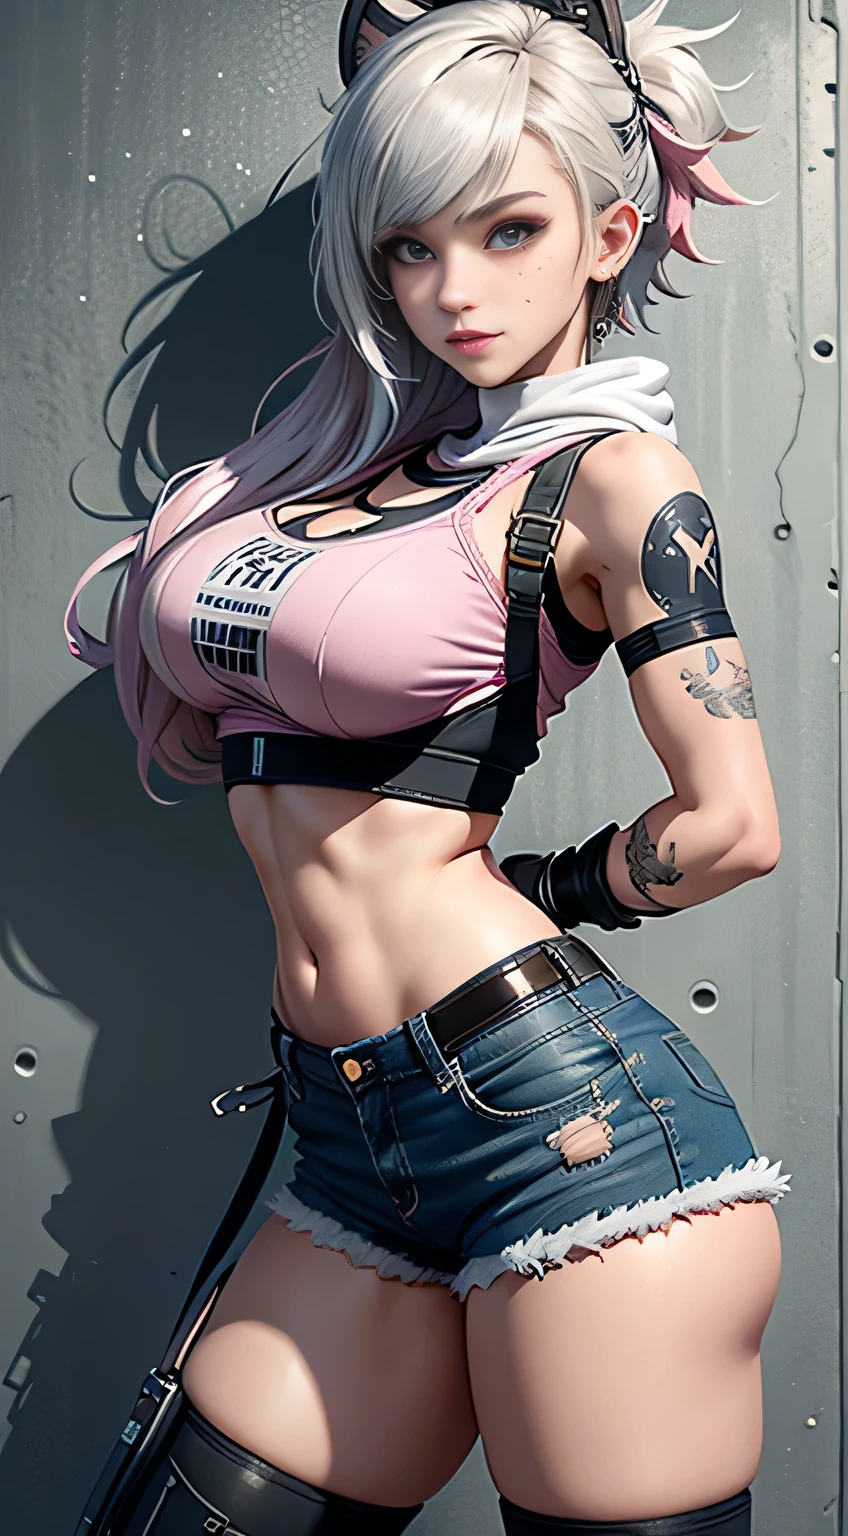 sfw, gwen tennyson,tracer,yorha 2b,y'shtola rhul,overwatch,nier automata,mecha pilot,shopping center,tattoos,orange and pink plugsuit,white short sleeve top,denim micro shorts,fishnet garter belt, uncovered belly,short hair,cute makeup,green eyes,multicolored silver hair,sexy smile,freckles,beautiful girl,large breasts,8k,ultra detailed, realistic,fantasy art,skater uniform,ear piercings,cyberpunk suit,saiyan girl, saiyan female,pink short sleeve sport hoodie,bear ear beanie,graffiti wall art,walking,small backpack, wearing bra,((skinny waist)), young asian girl, ((big breasted)),